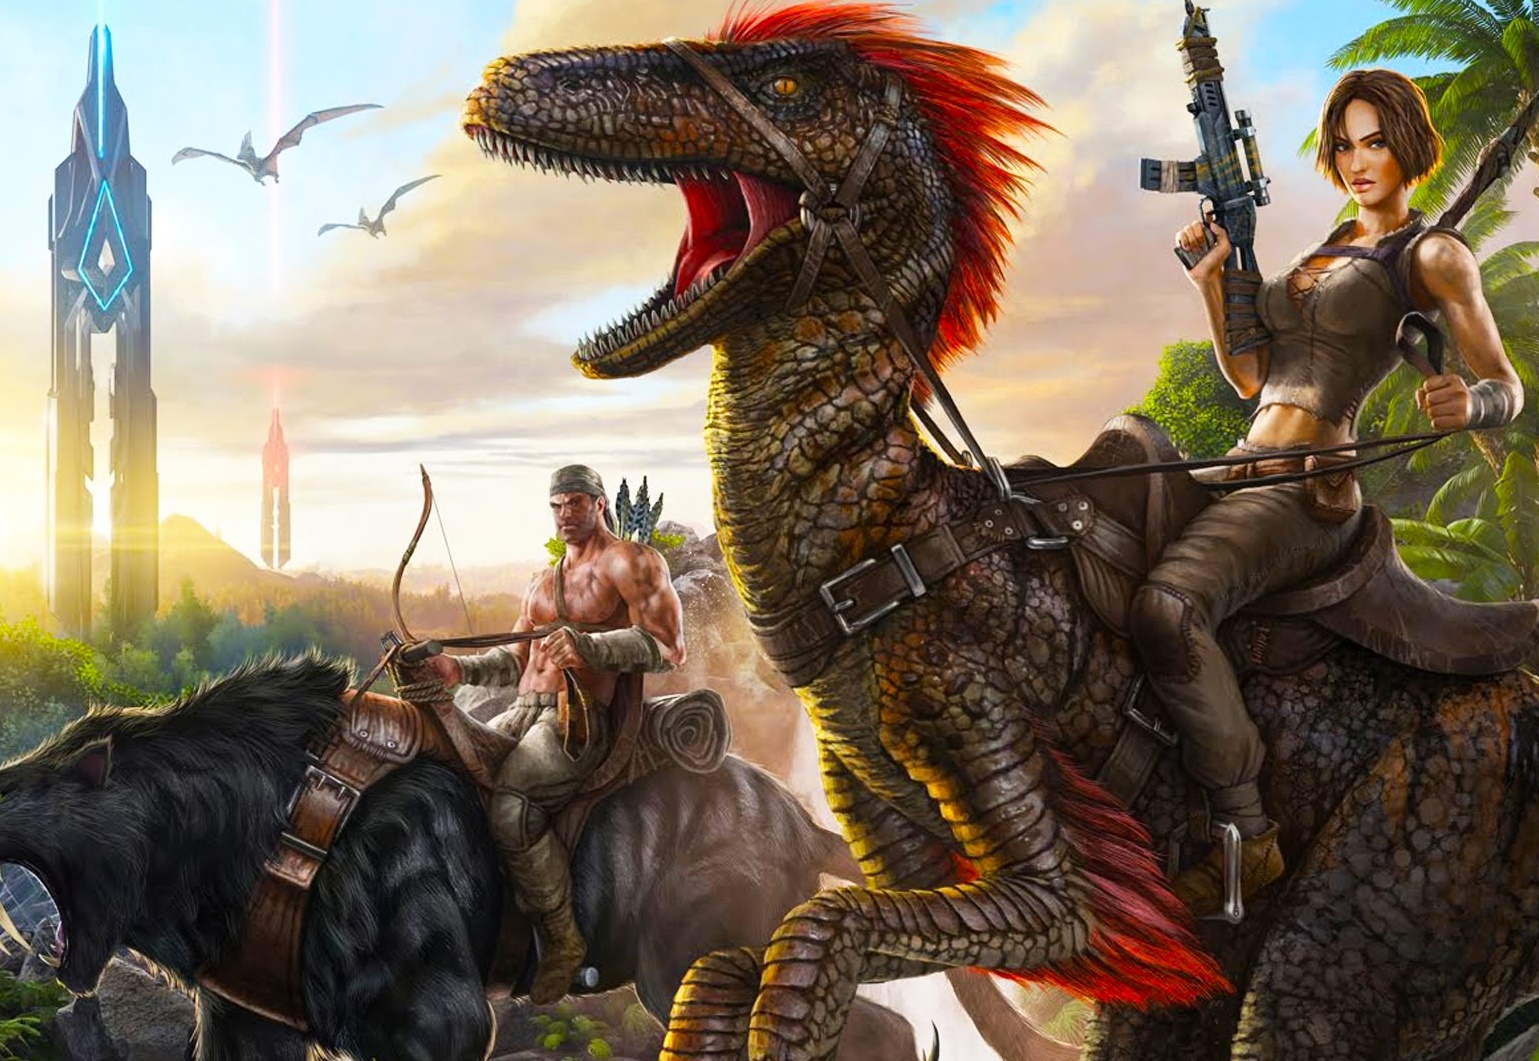 Download ARK Survival Evolved game for PC - Tech Story